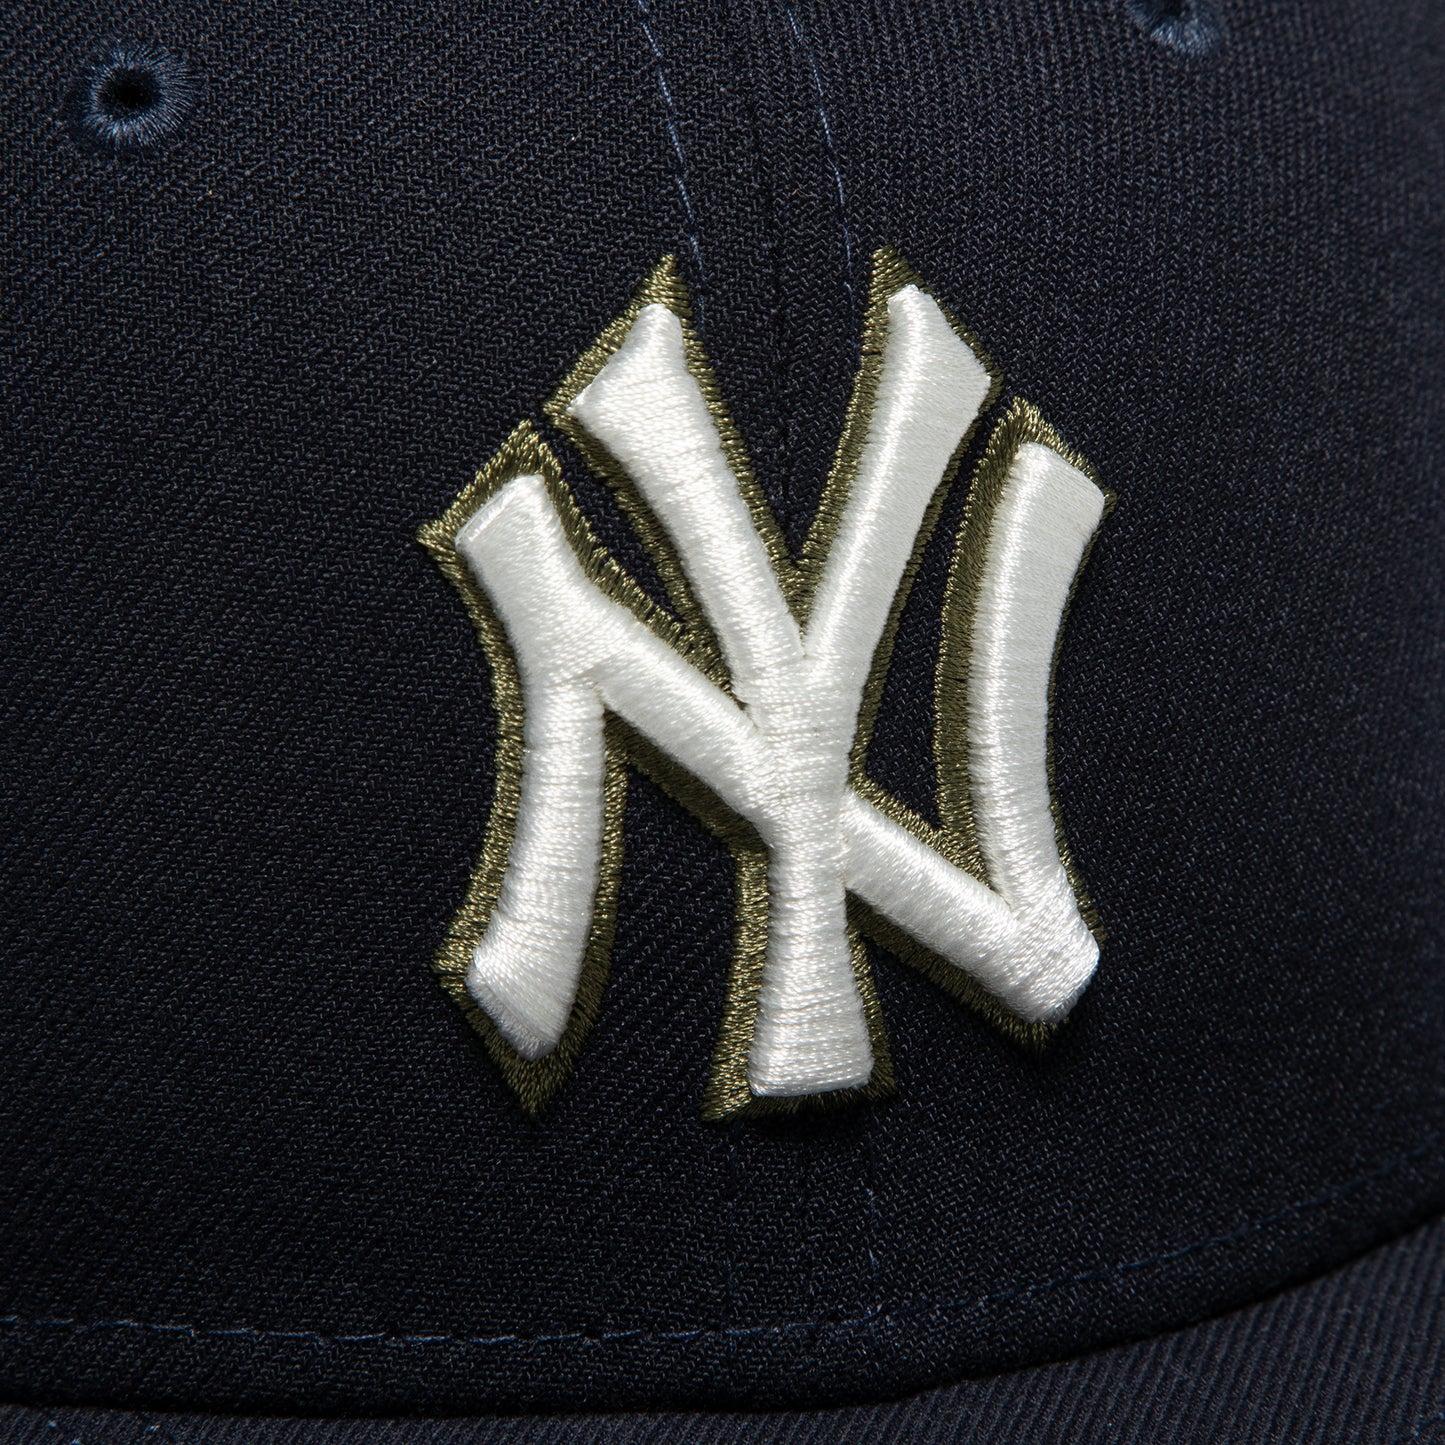 New Era New York Yankees Botanical 59FIFTY Fitted Hat (Blue)